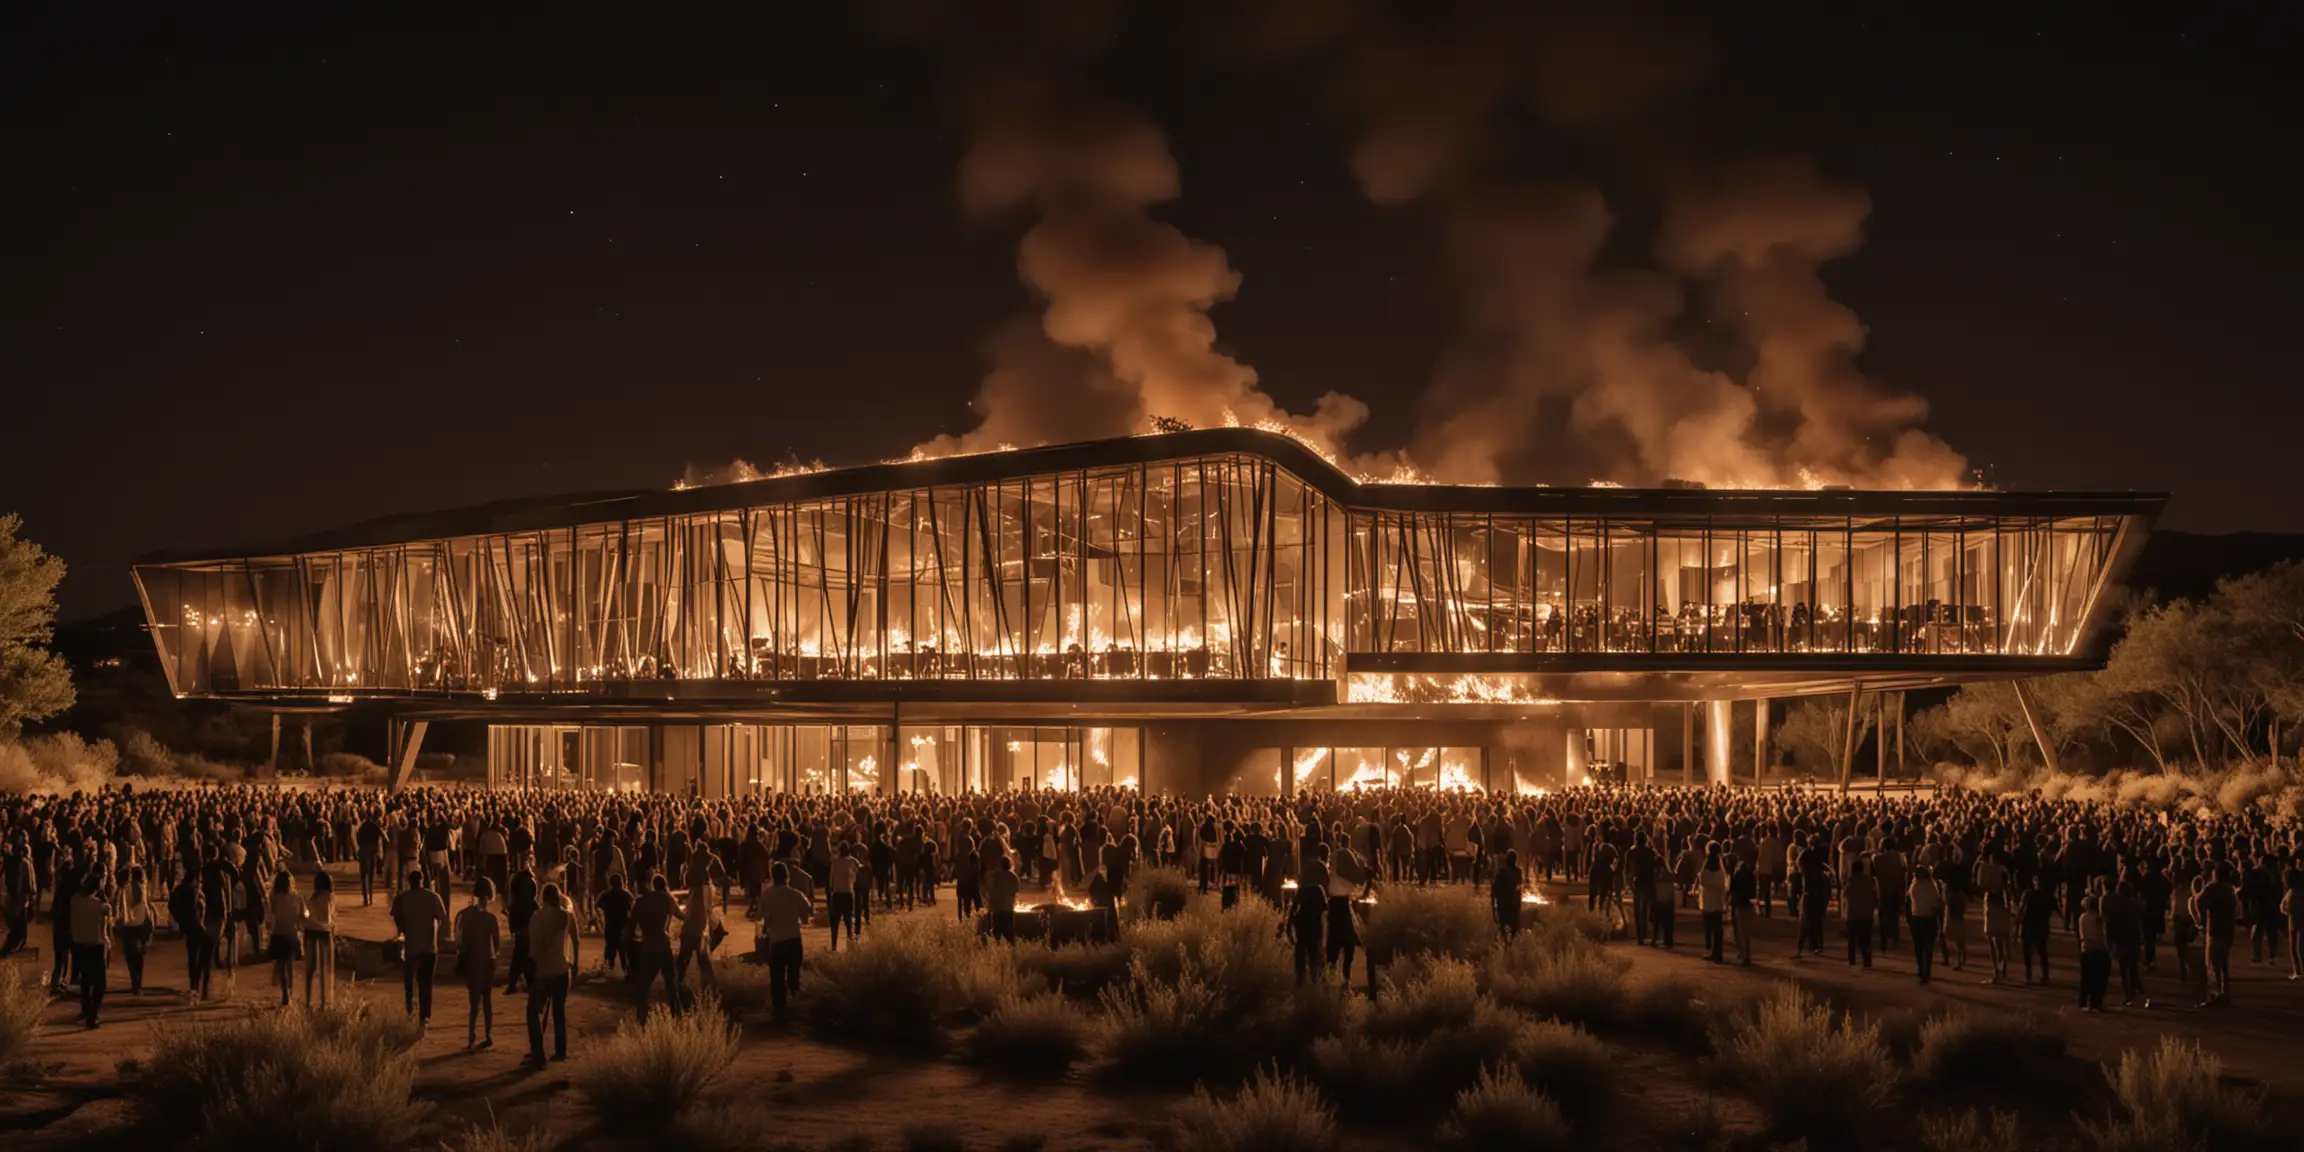 SAOTA modern architecture inspired Afrika Burn structure, on fire, a lot of people dancing around, at night, in the Karoo 